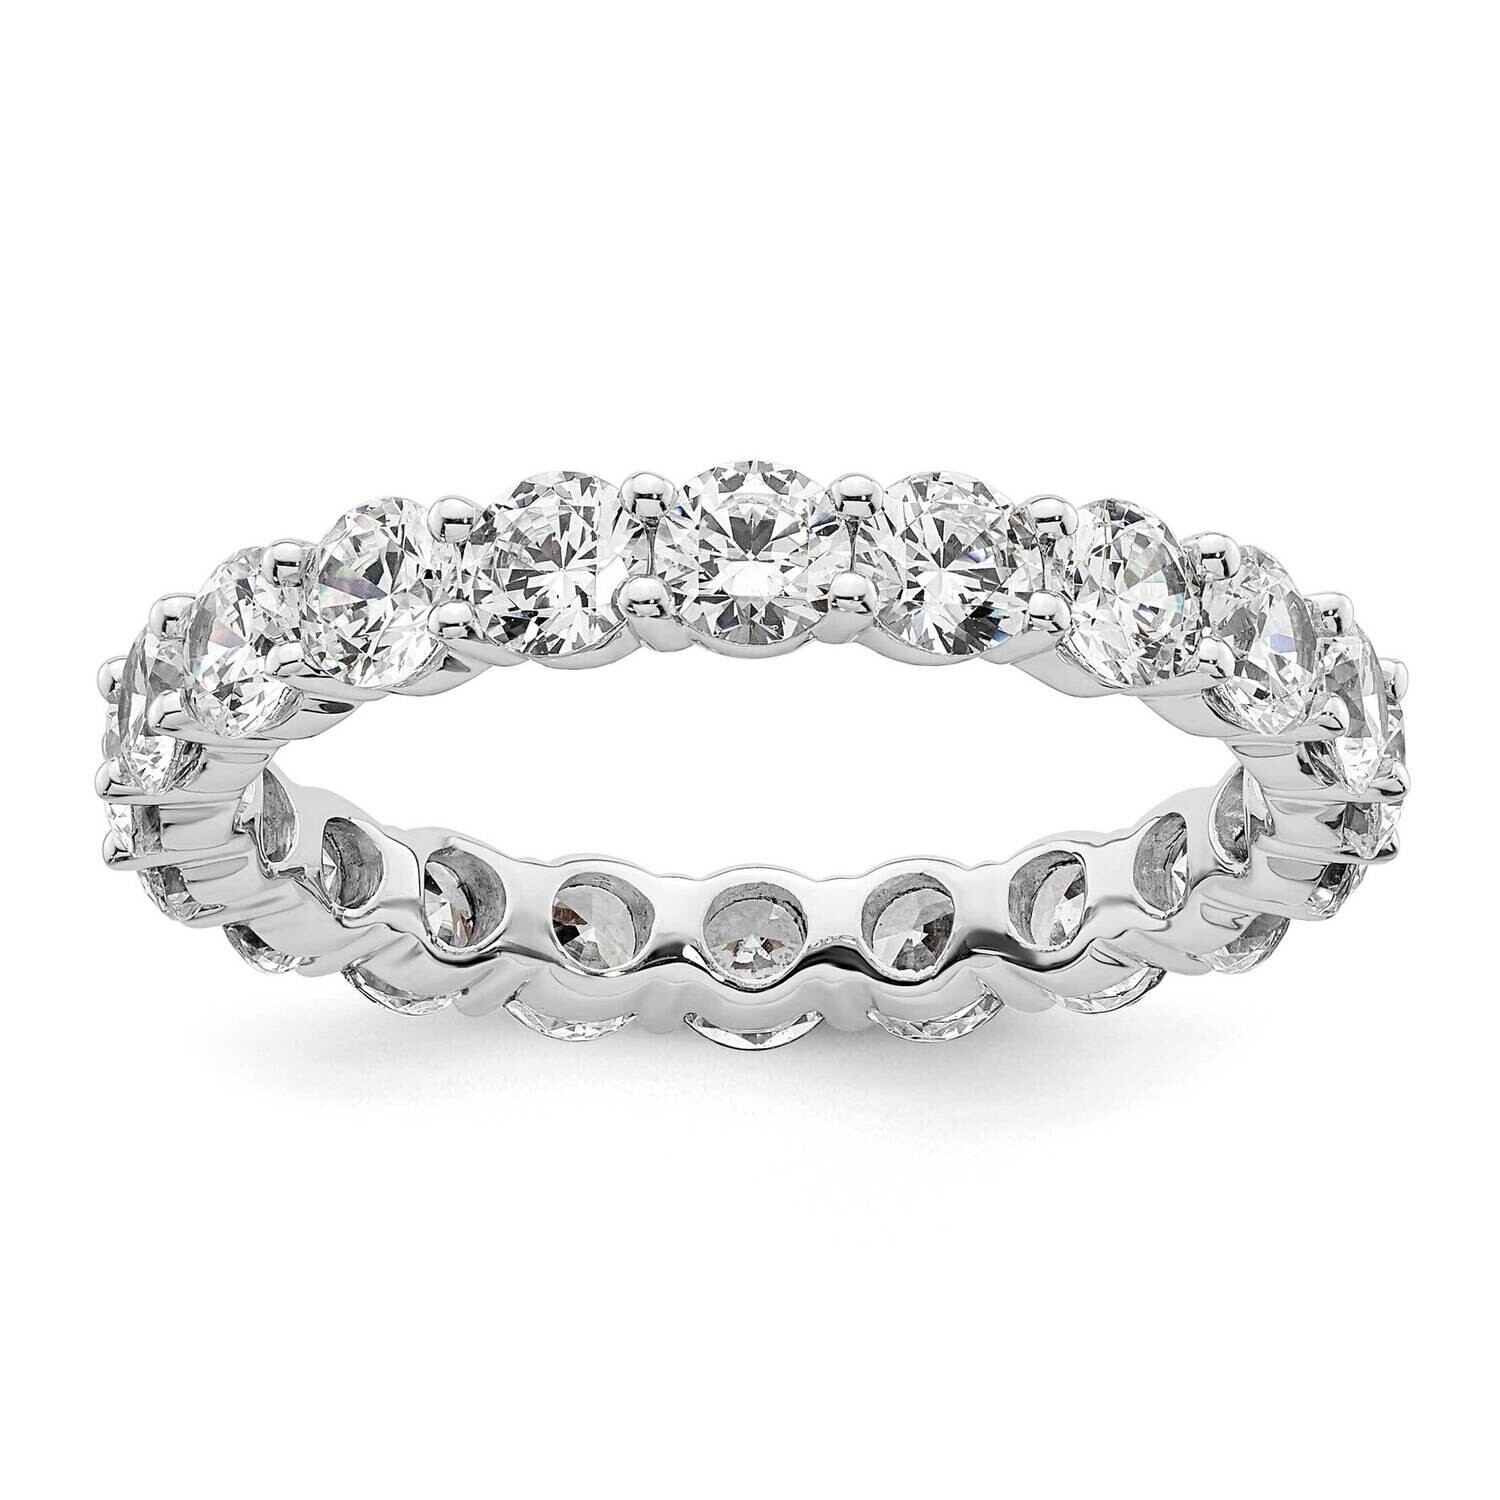 Polished Shared Prong 3 Carat Diamond Complete Eternity Band 14k White Gold ET0001-300-9W4